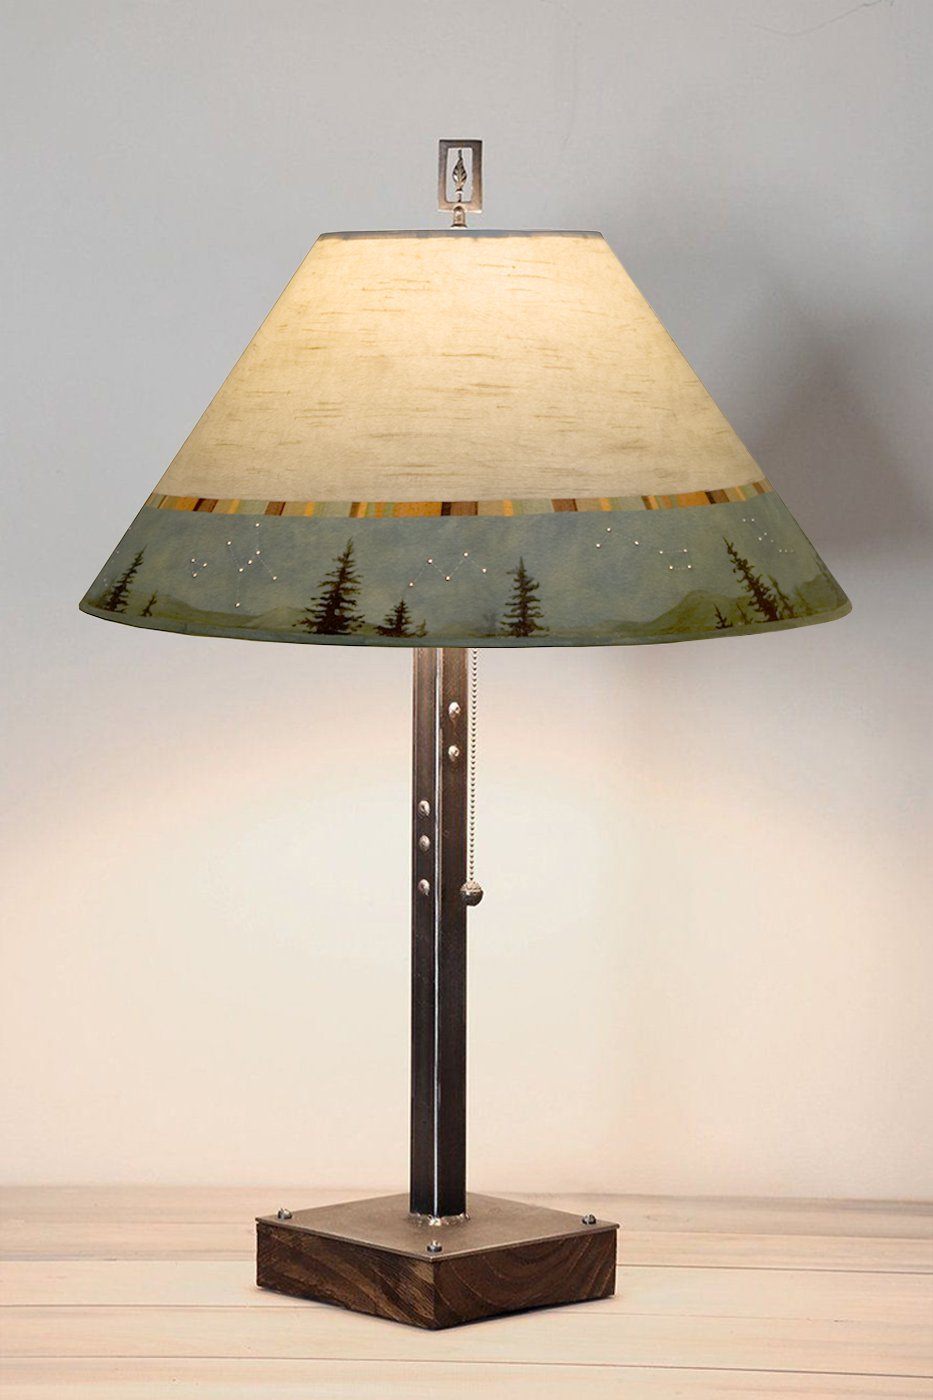 Steel Table Lamp on Wood with Large Conical Shade in Birch Midnight